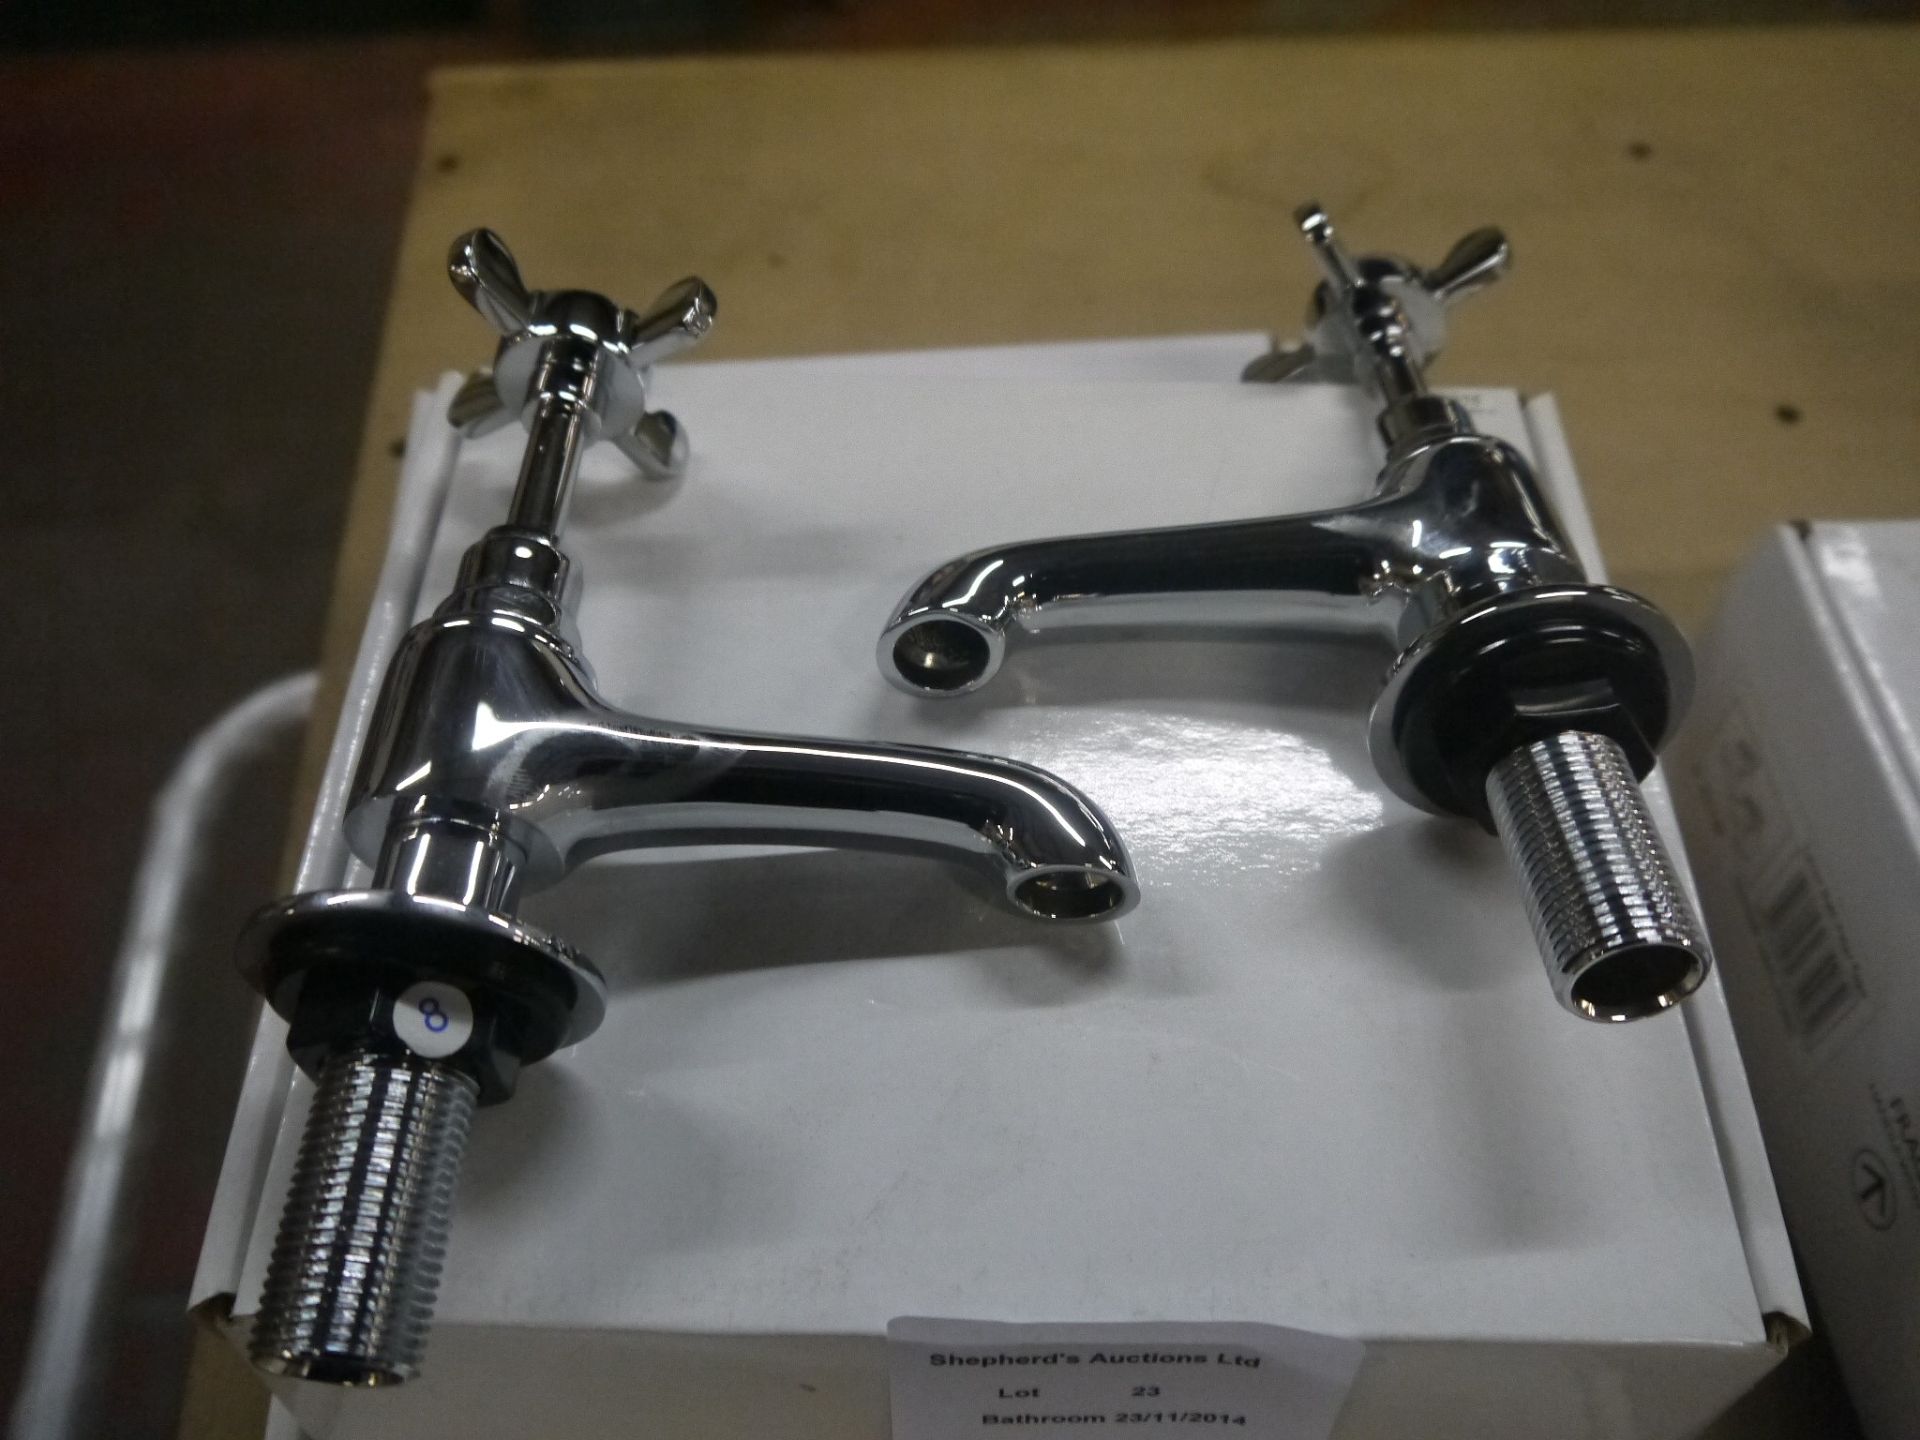 Jacuzzi Westminster basin taps, new and boxed